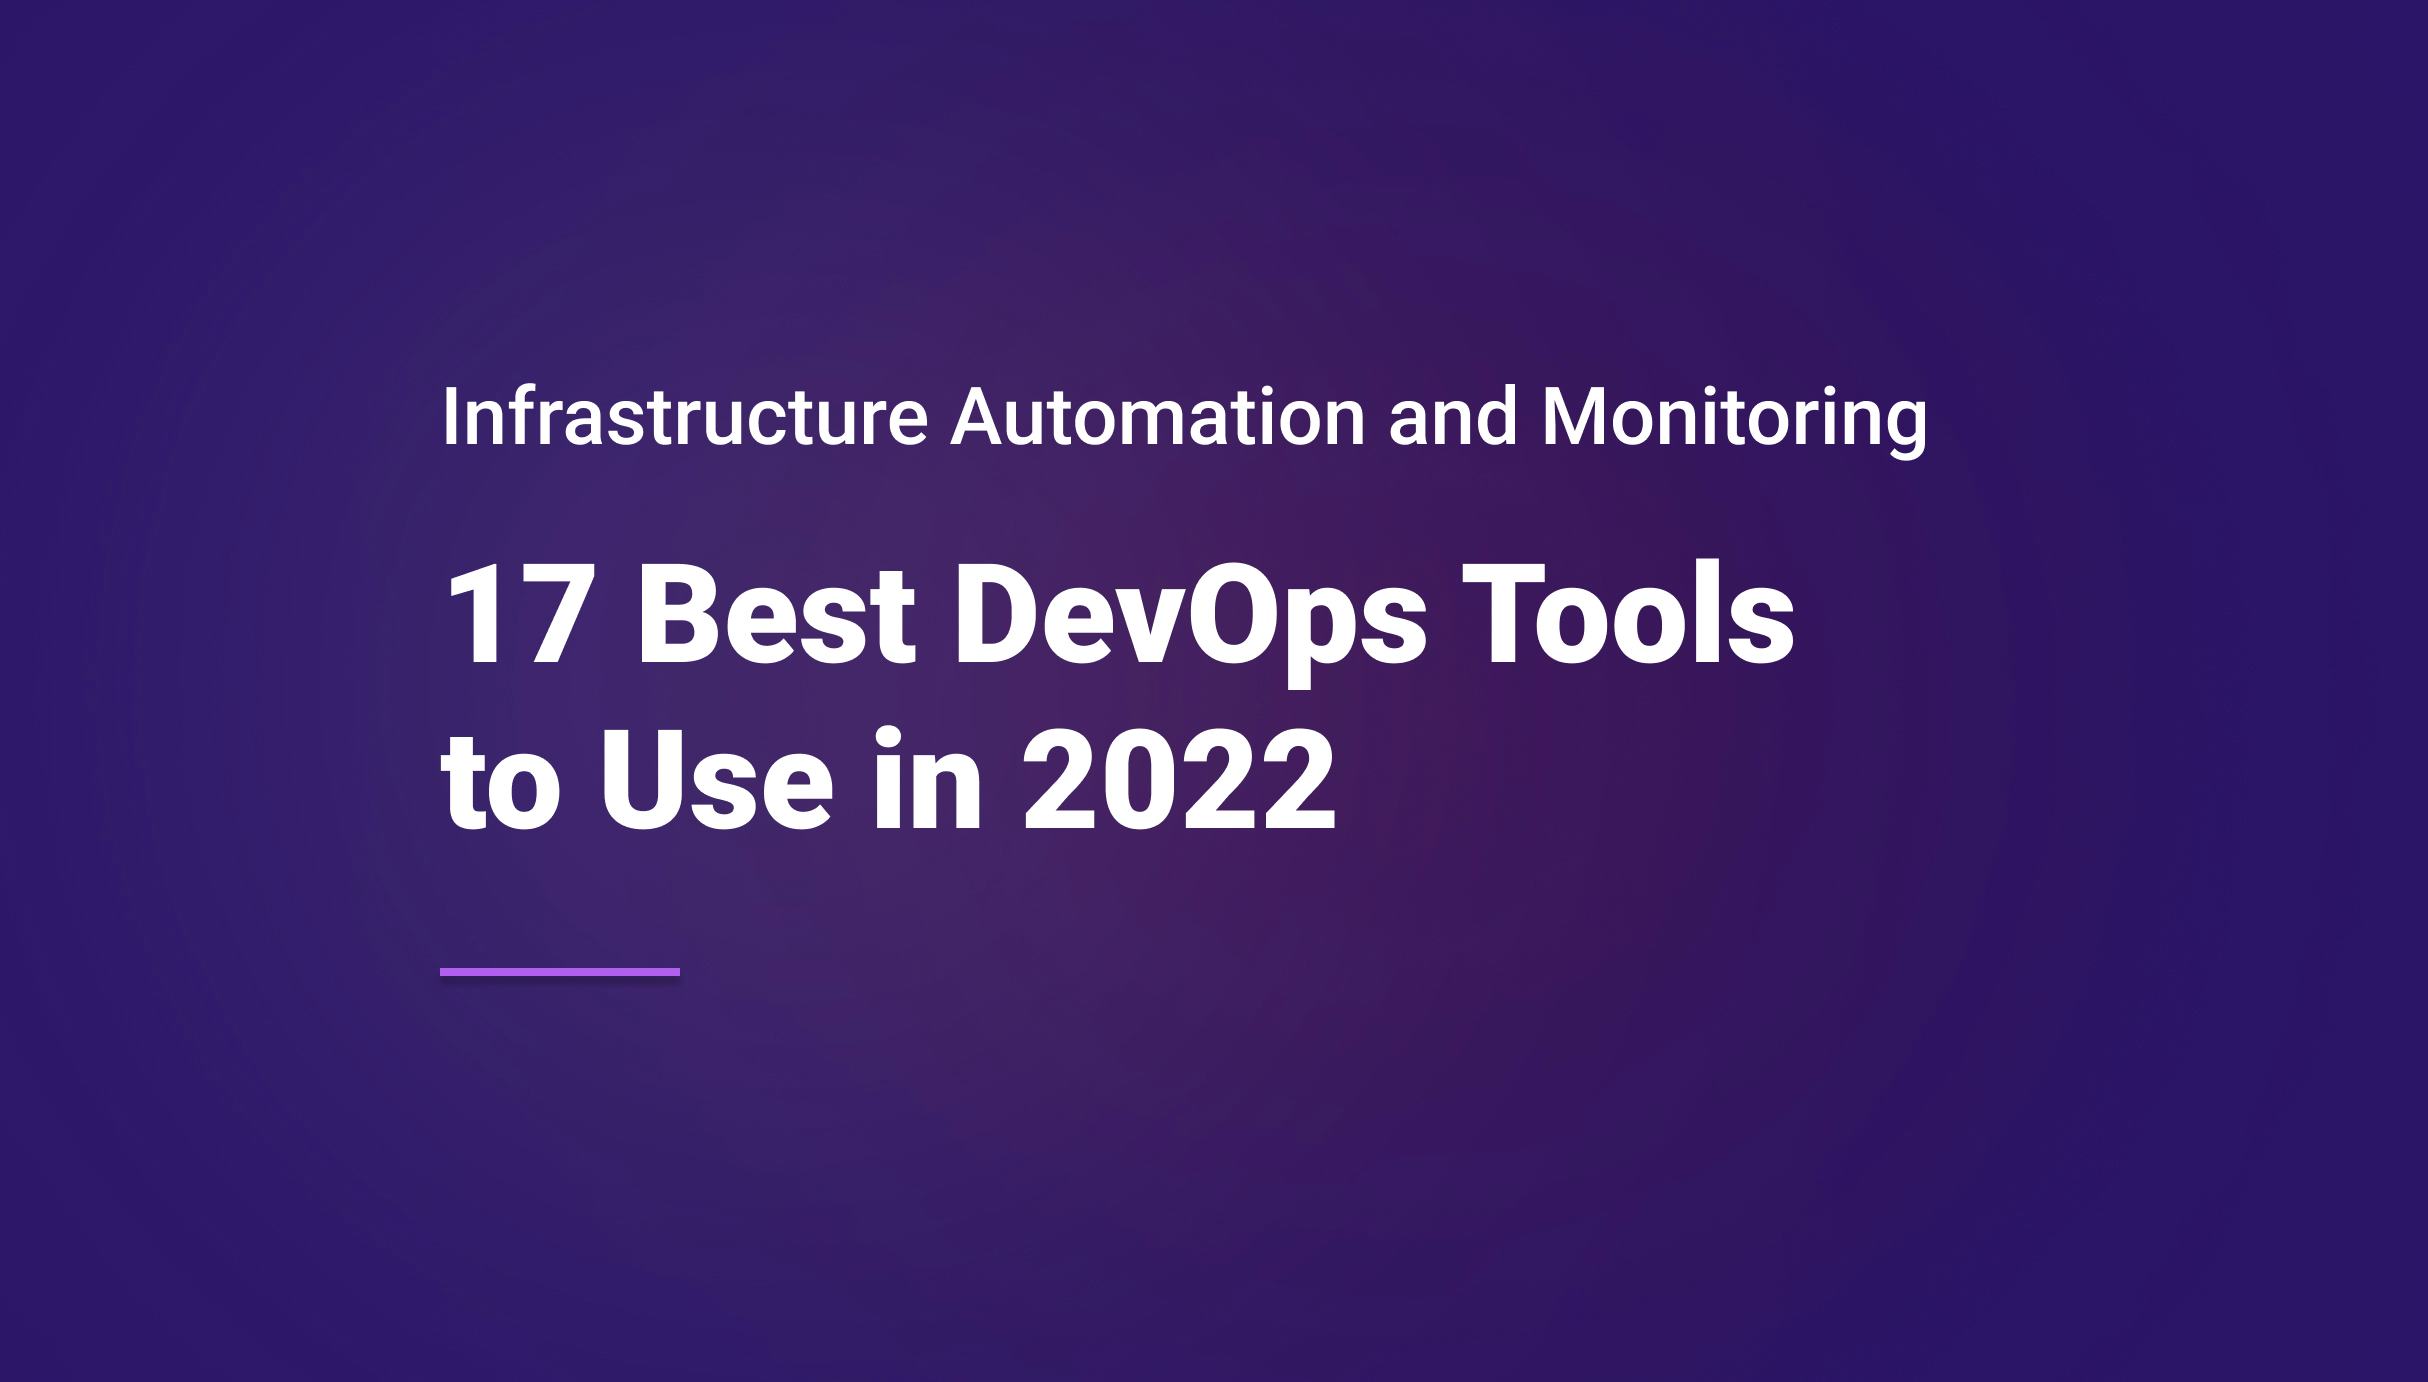 17 Best DevOps Tools to Use in 2022 for Infrastructure Automation and Monitoring - Qovery